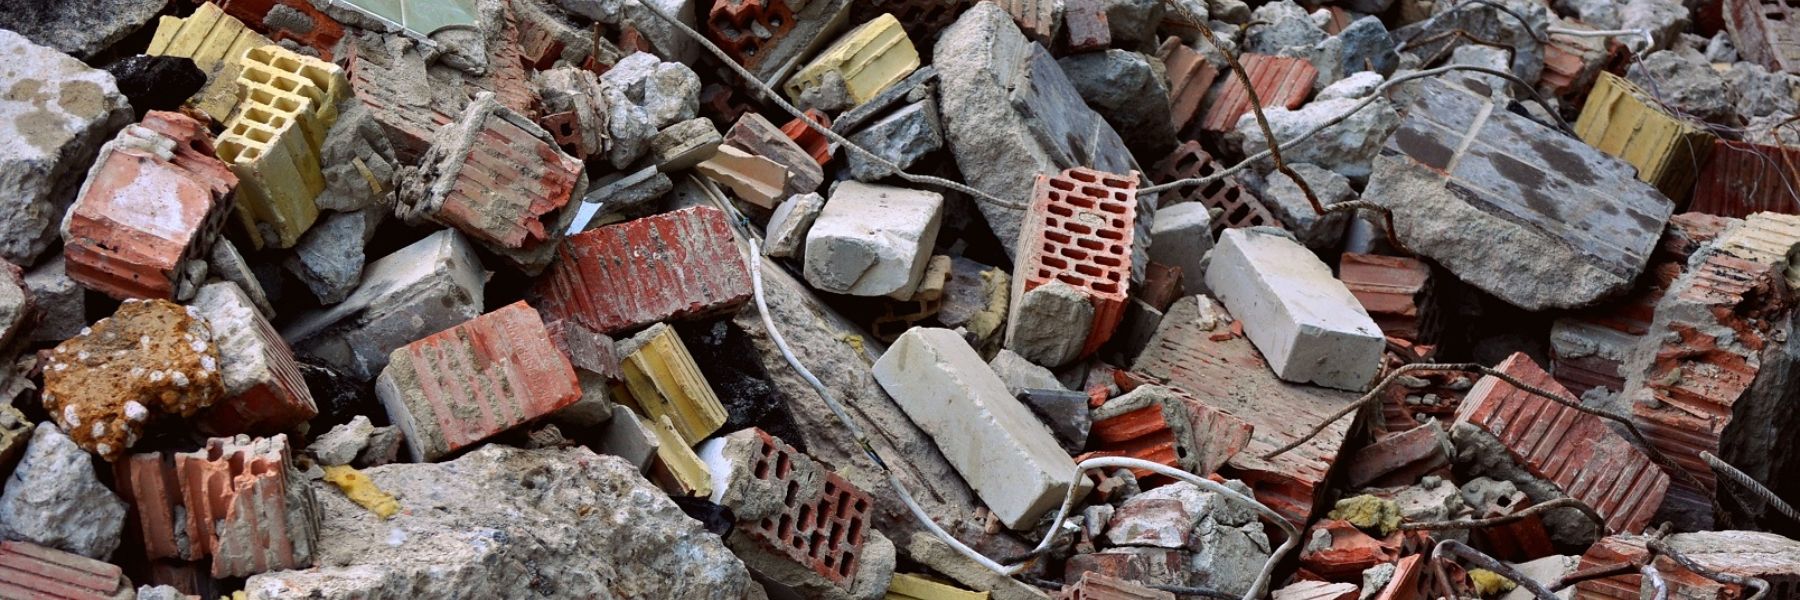 Construction Waste with Bricks and Concrete